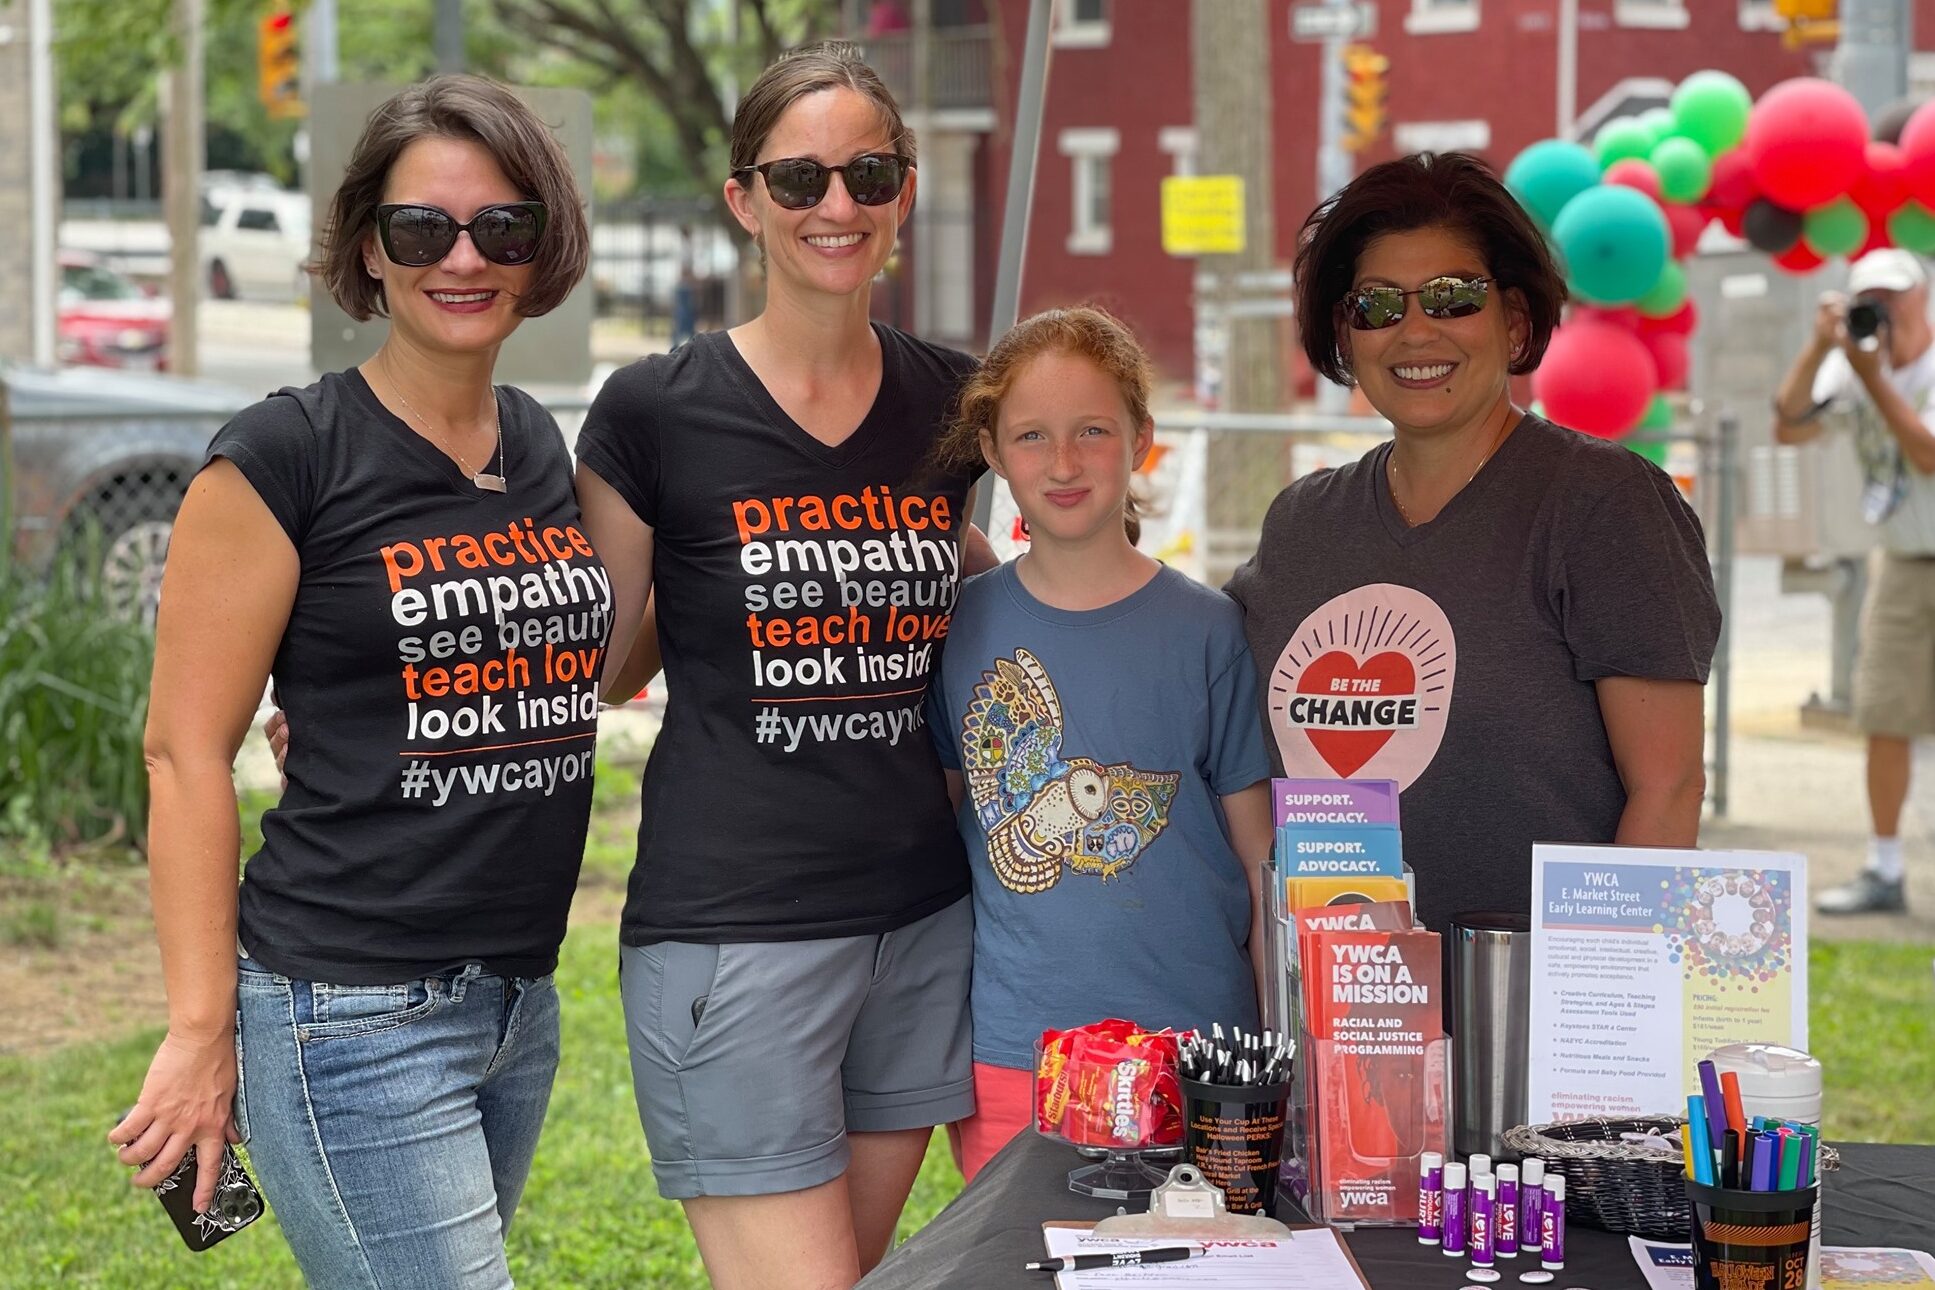 YWCA York Racial Justice Committee and staff members smiling at a community event with their table of resources and swag